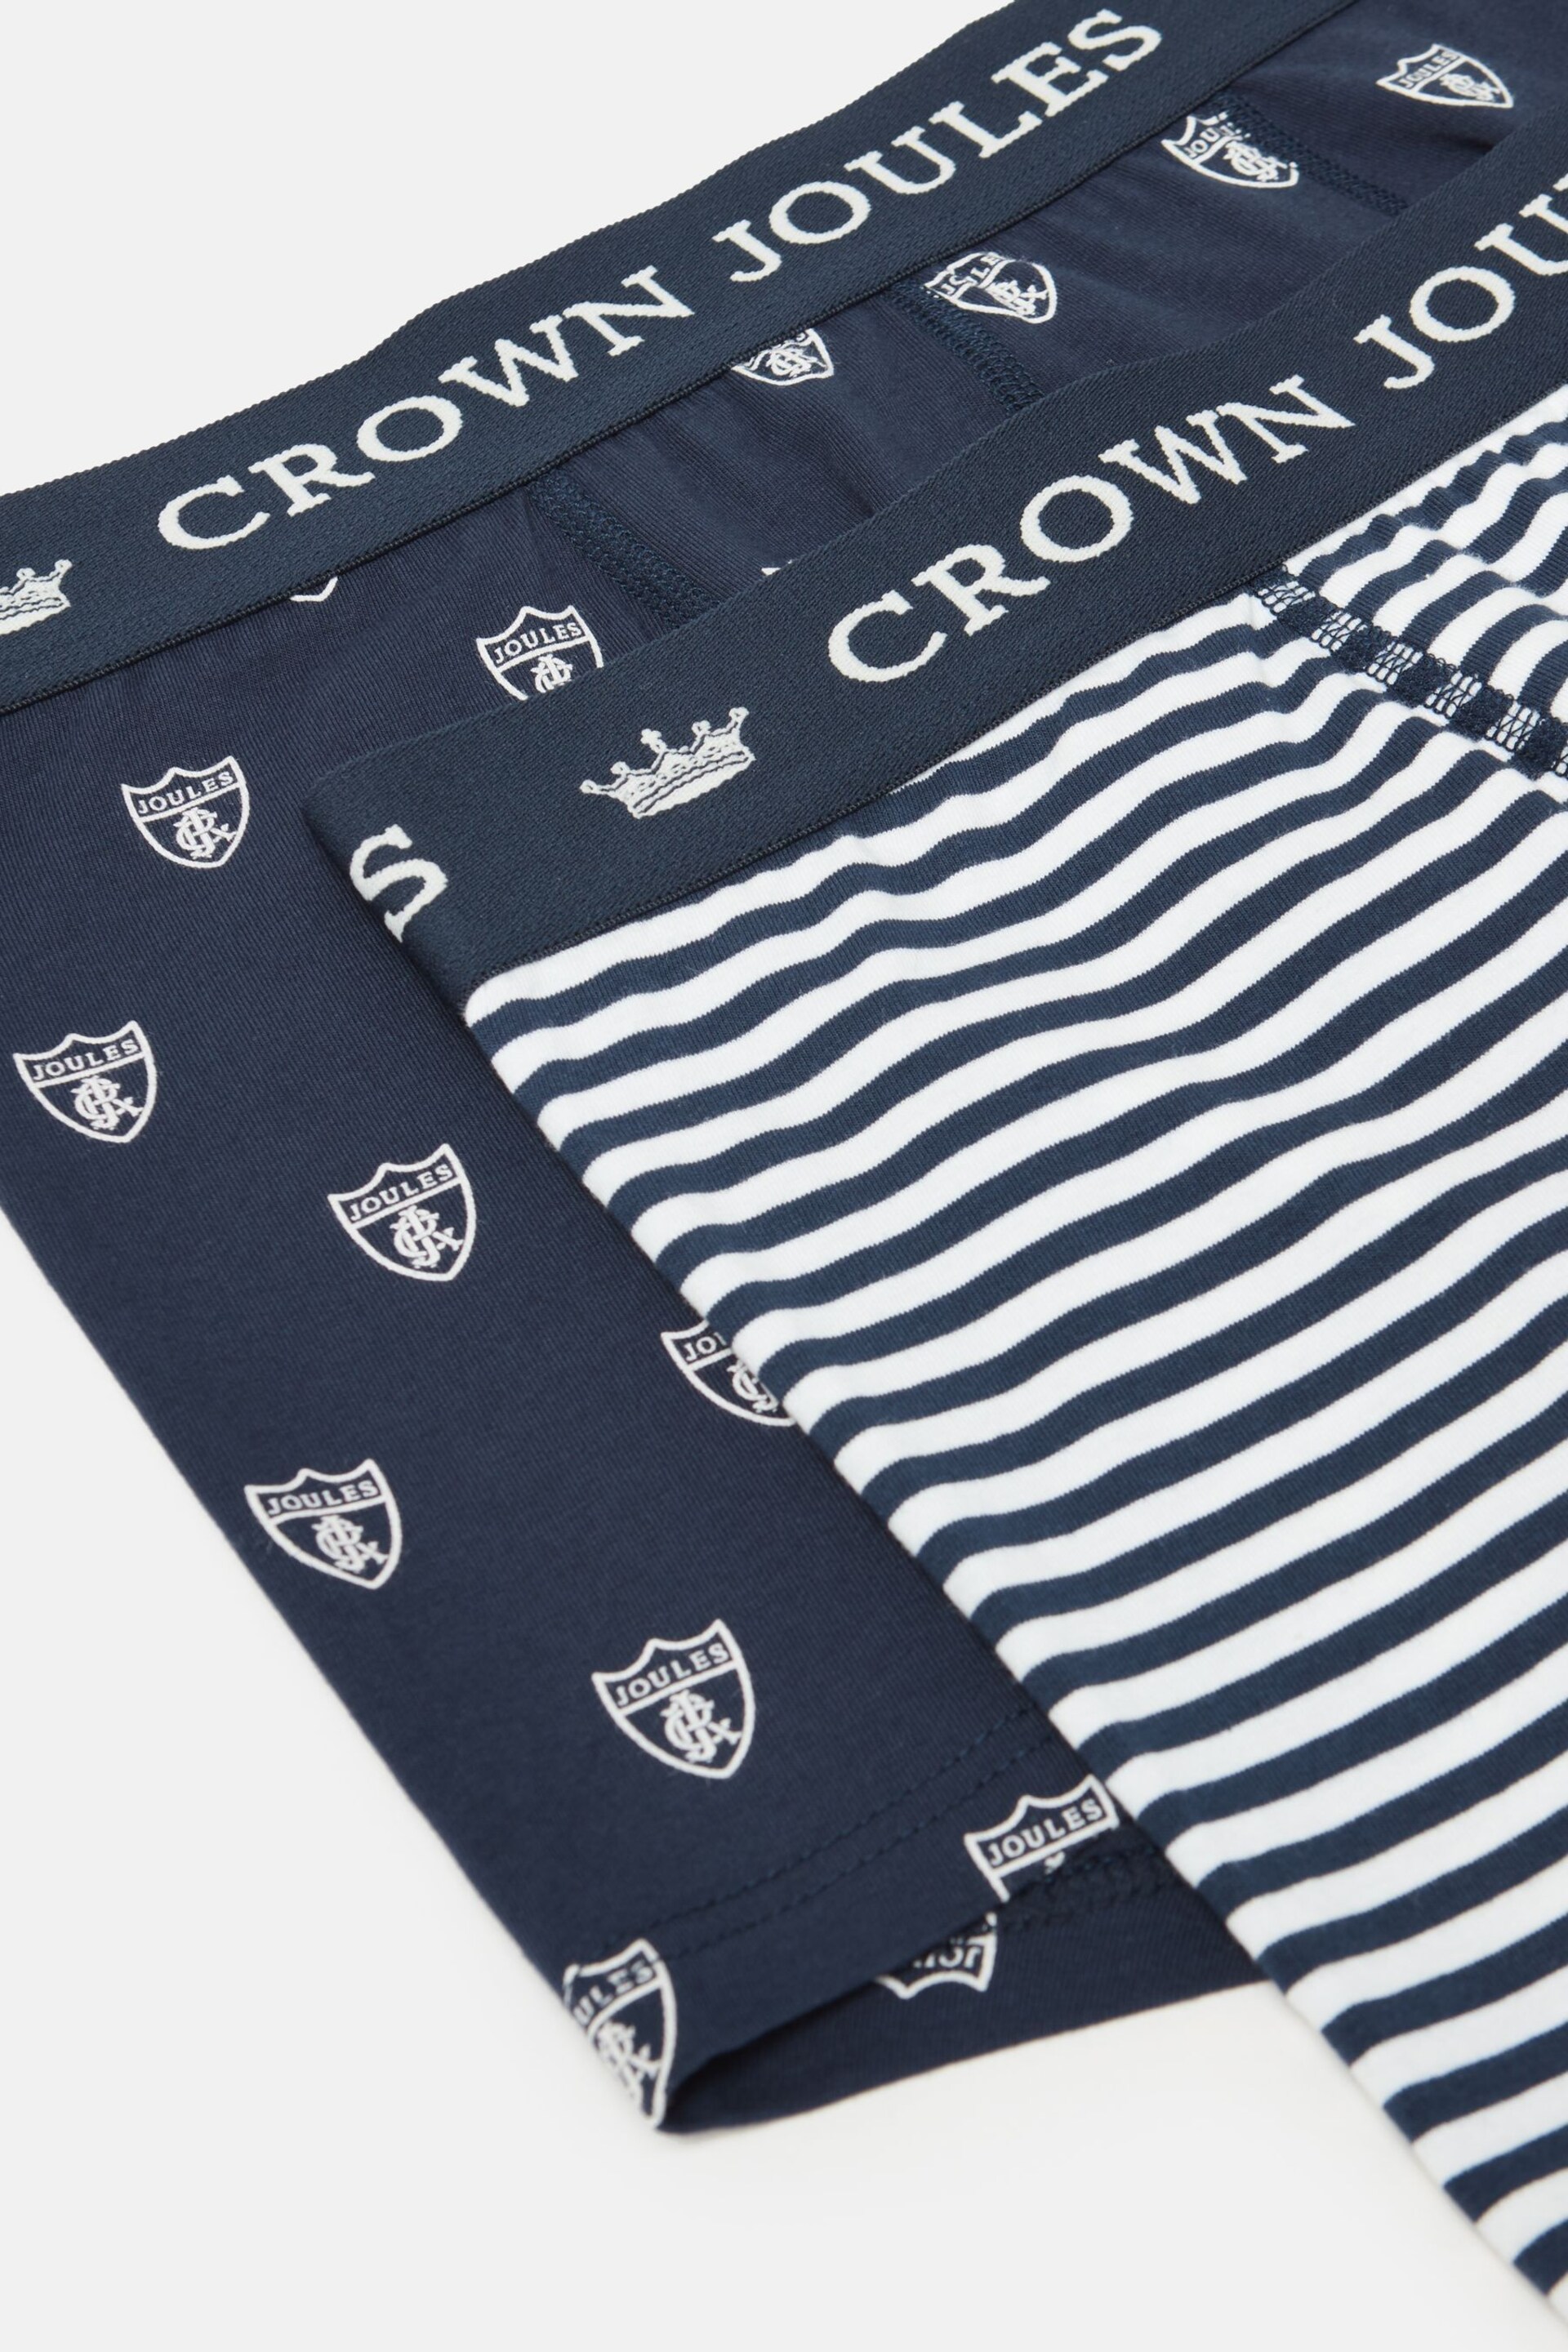 Joules Crown Navy & White Crest Cotton Boxer Briefs 2 Pack - Image 4 of 4